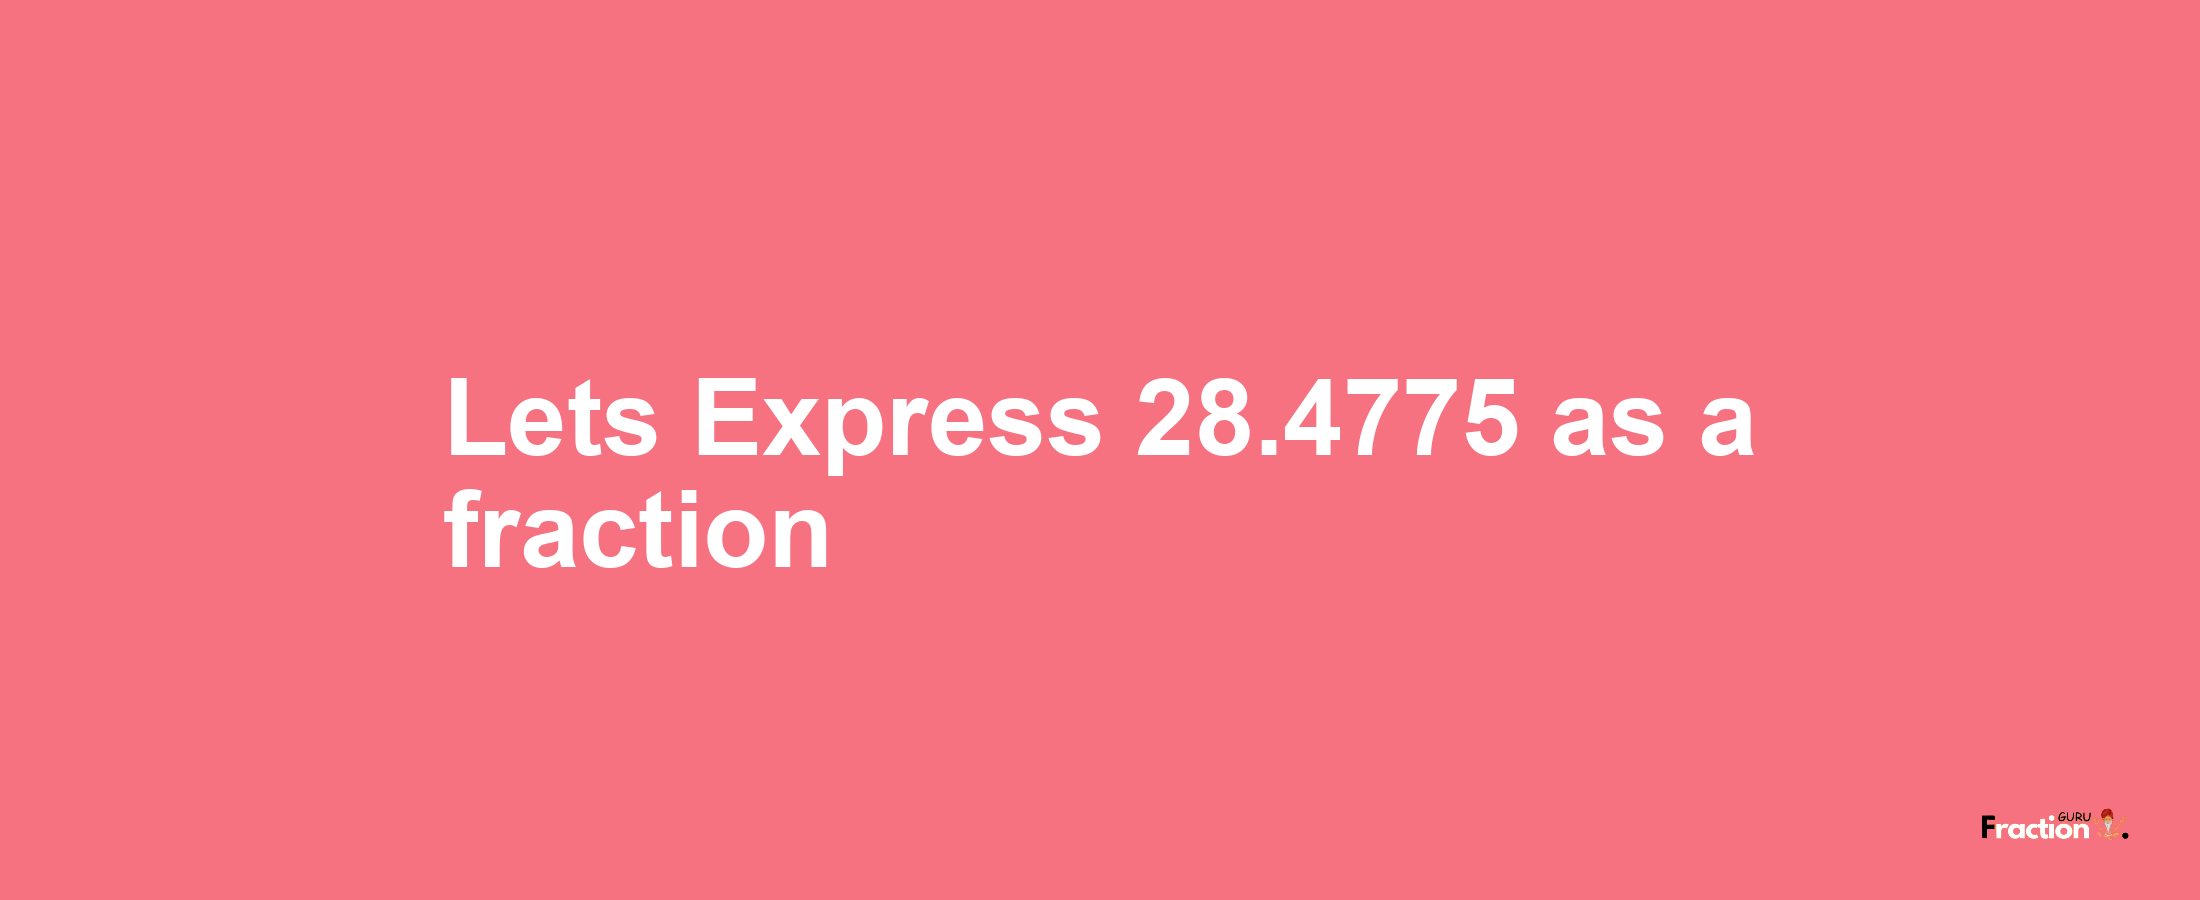 Lets Express 28.4775 as afraction